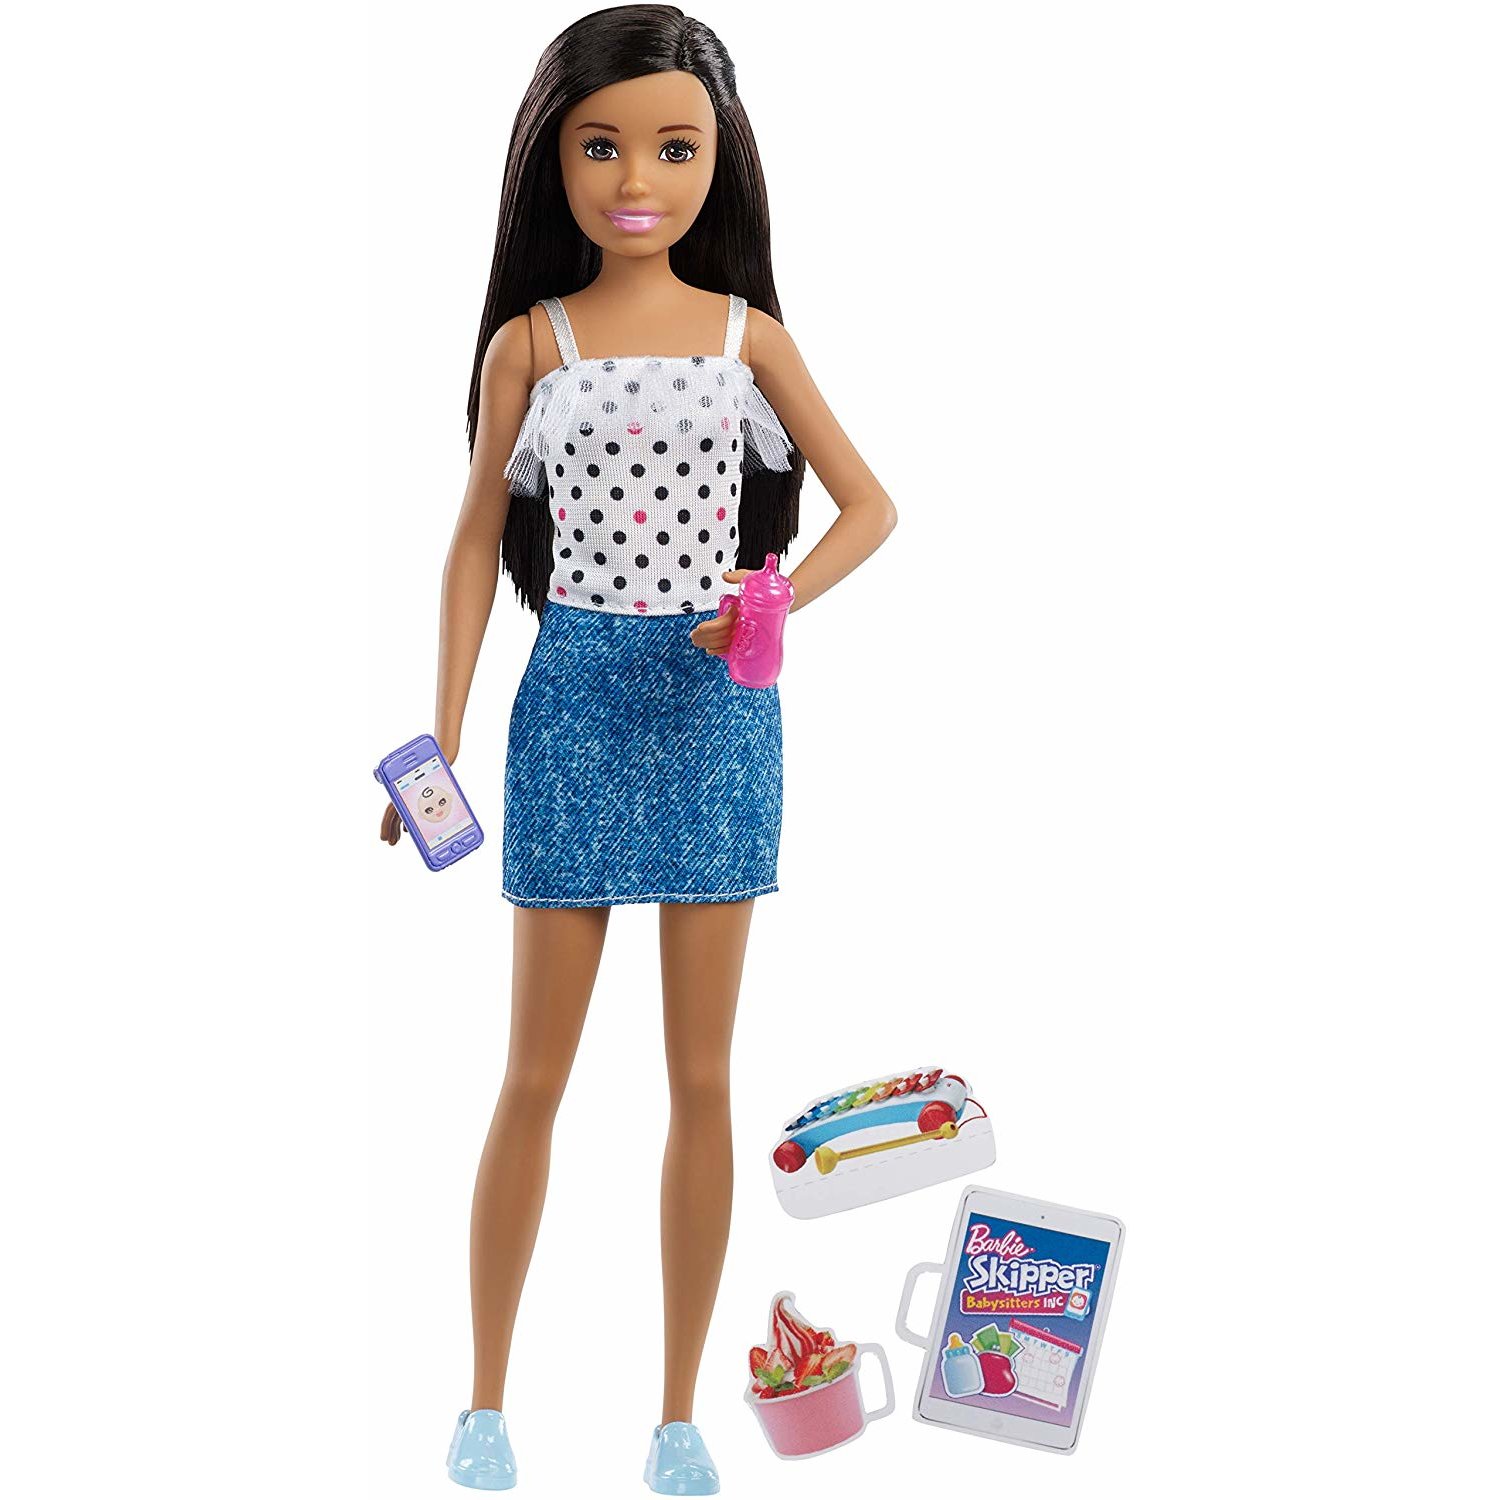 Barbie FXG92 Skipper Babysitters INC Dot - Doll and Accessories